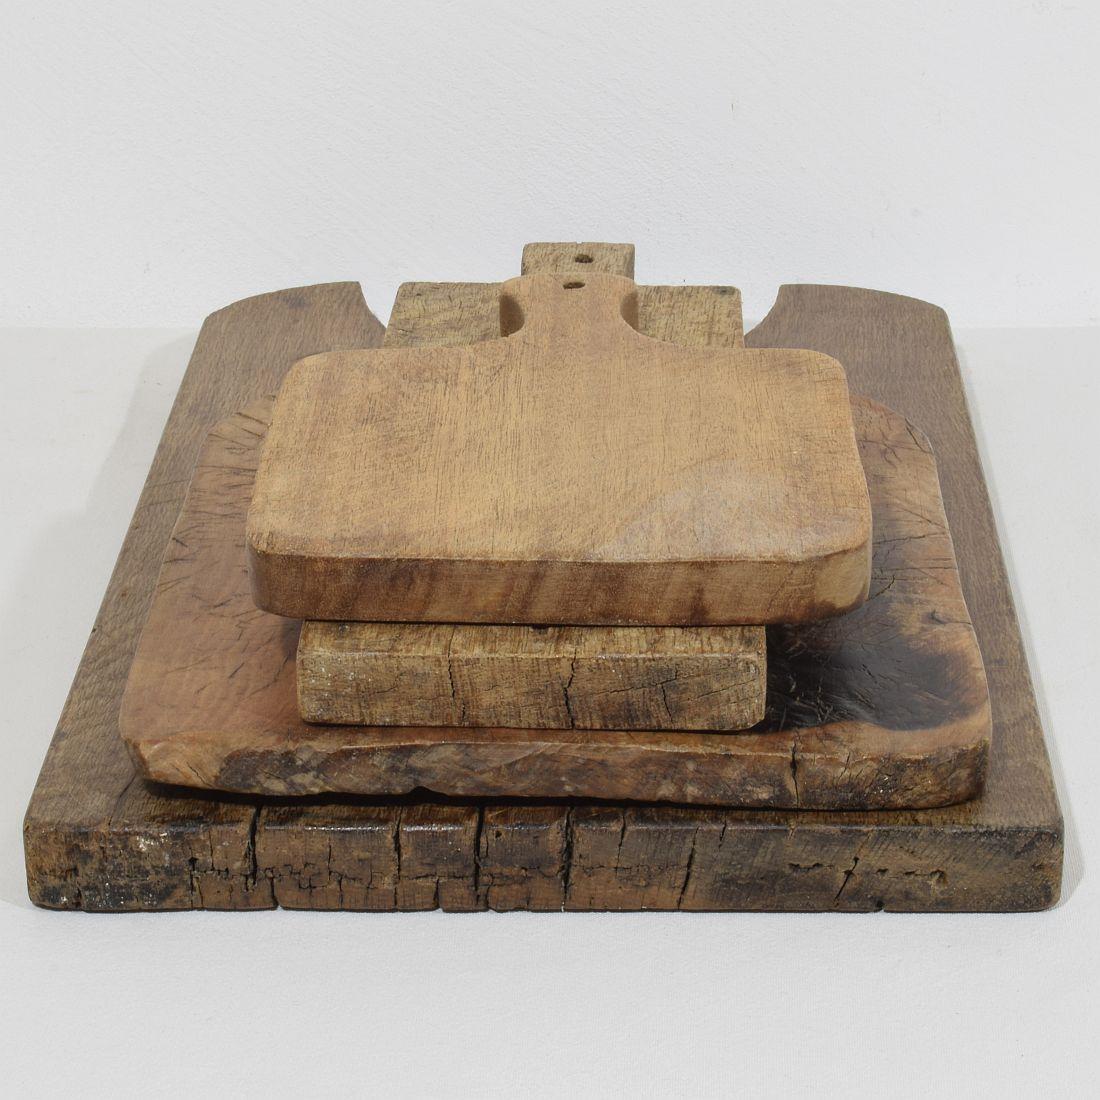 Collection of Four Rare French, 19th Century, Wooden Chopping or Cutting Boards 15